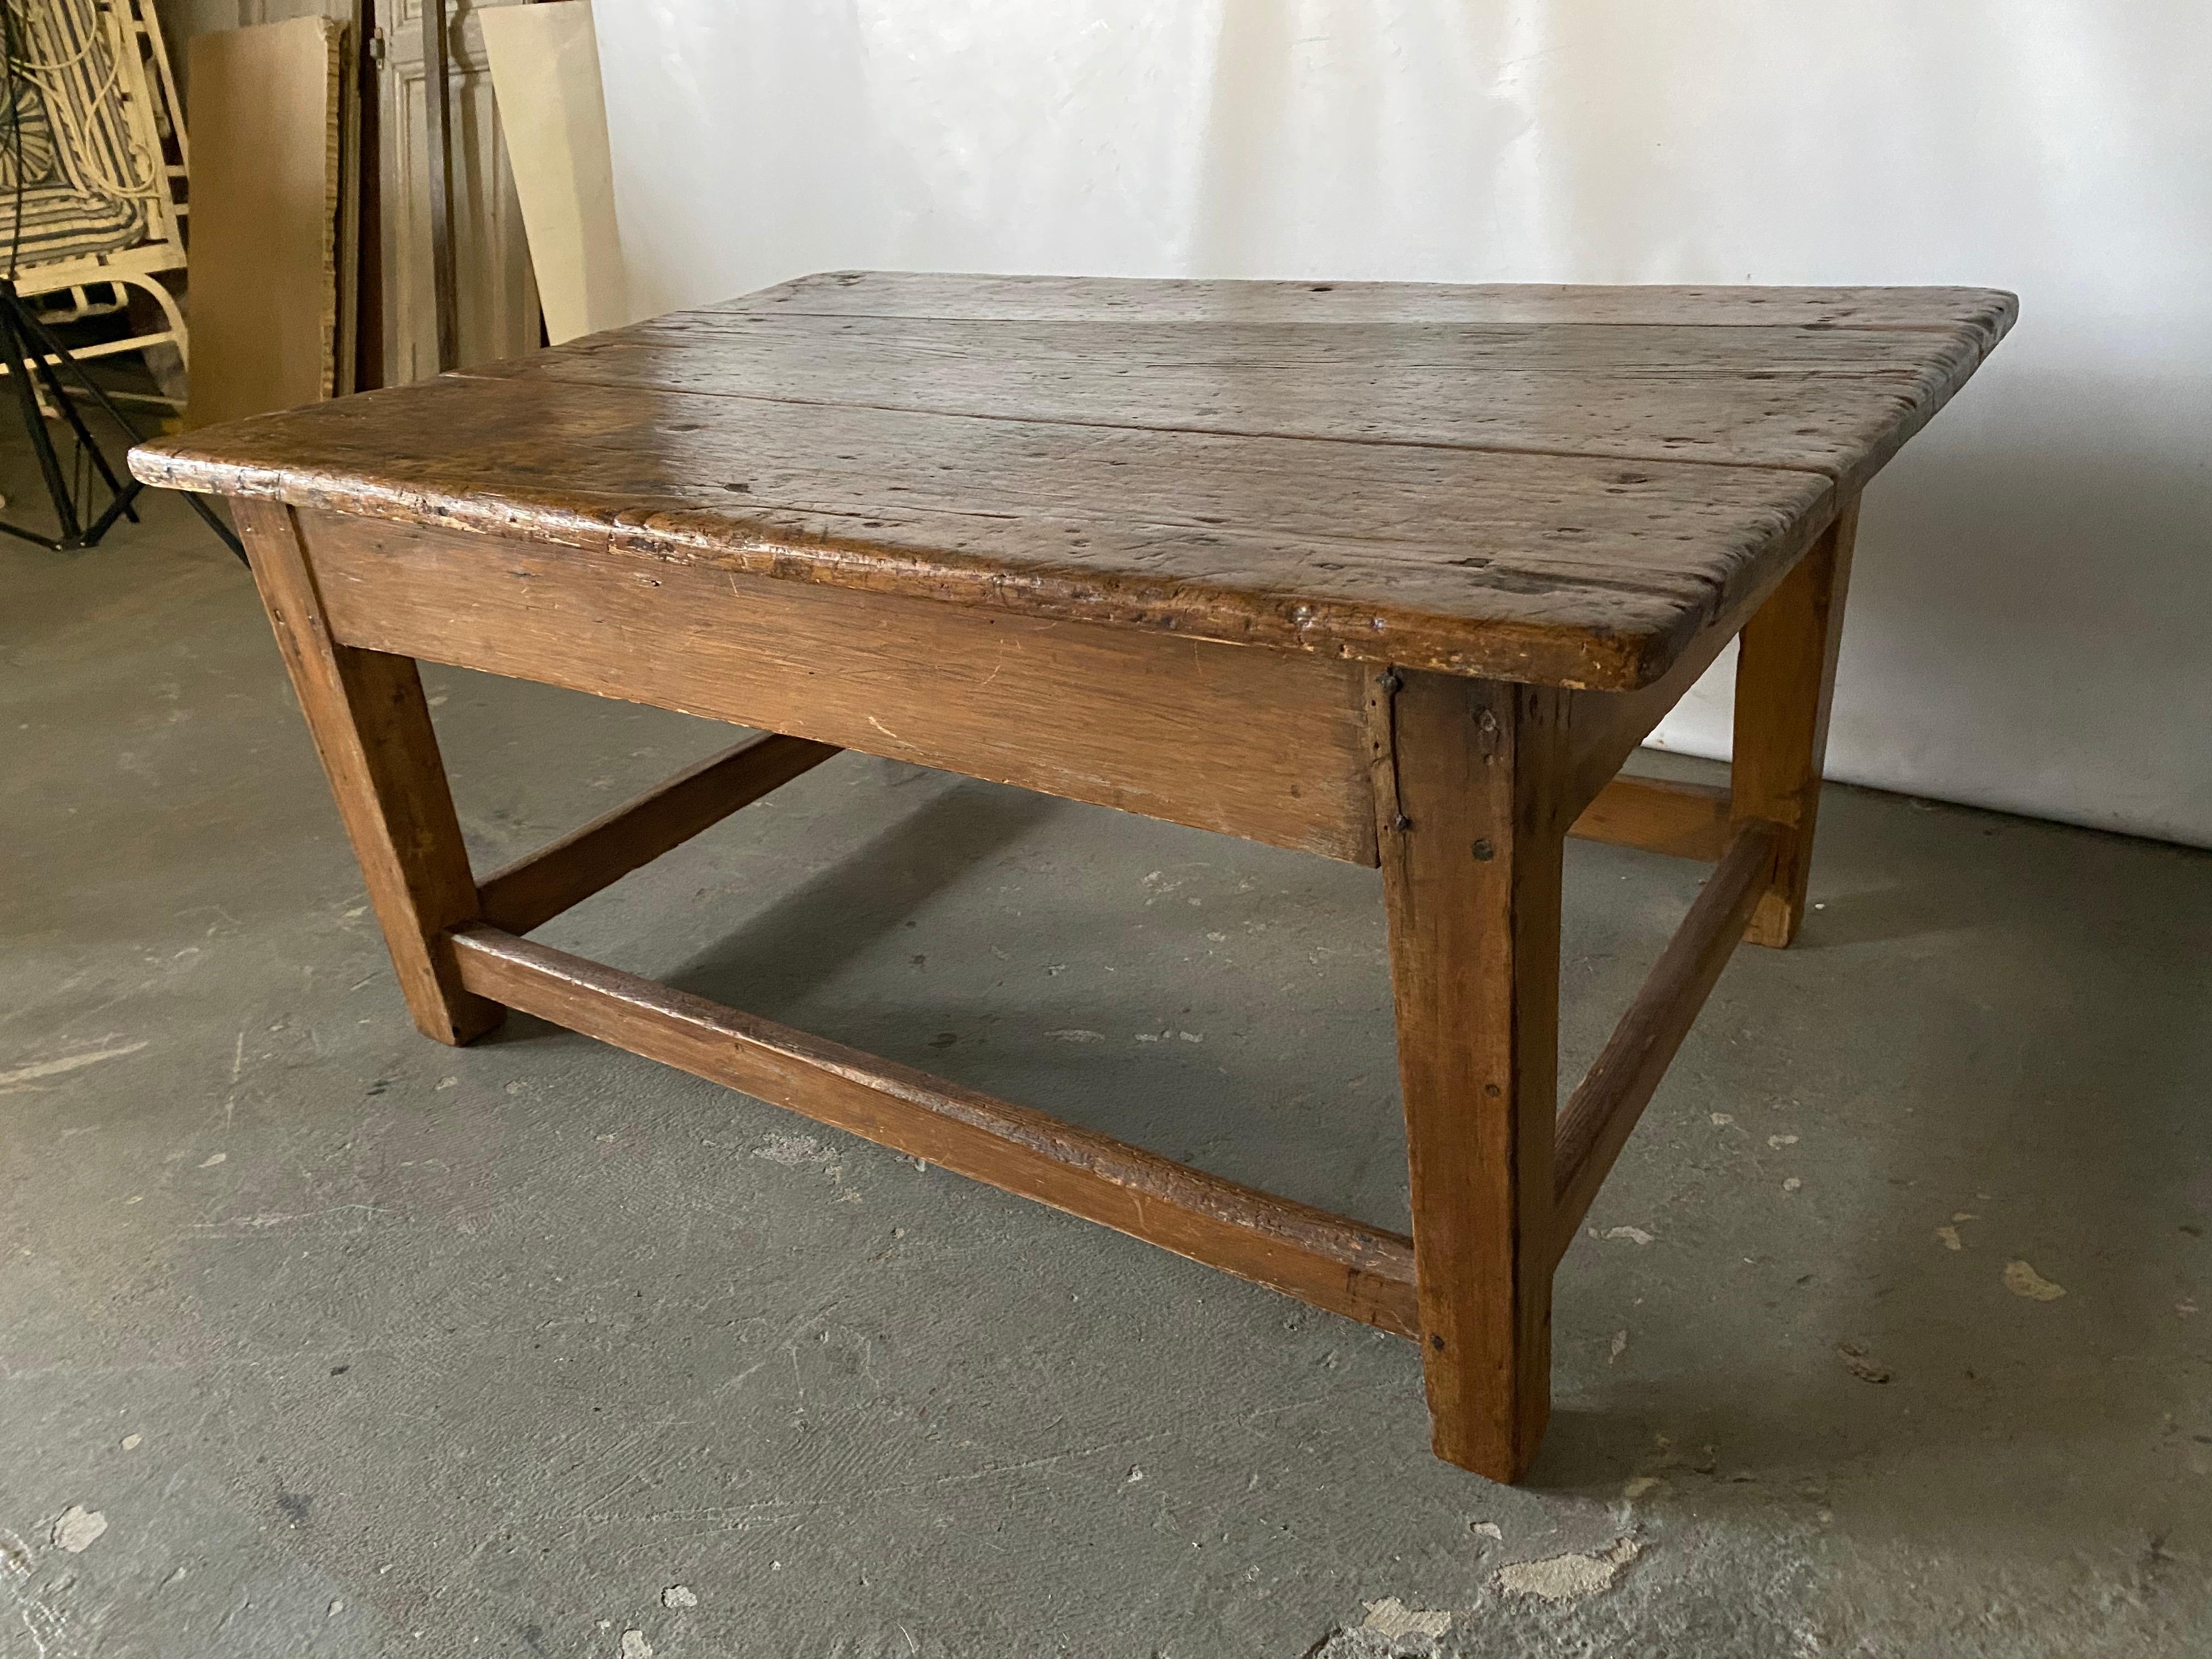 Perfect for adding a bit a character to formal, casual or modern decor. This rustic farm style country coffee table has great wood patina only time can create.